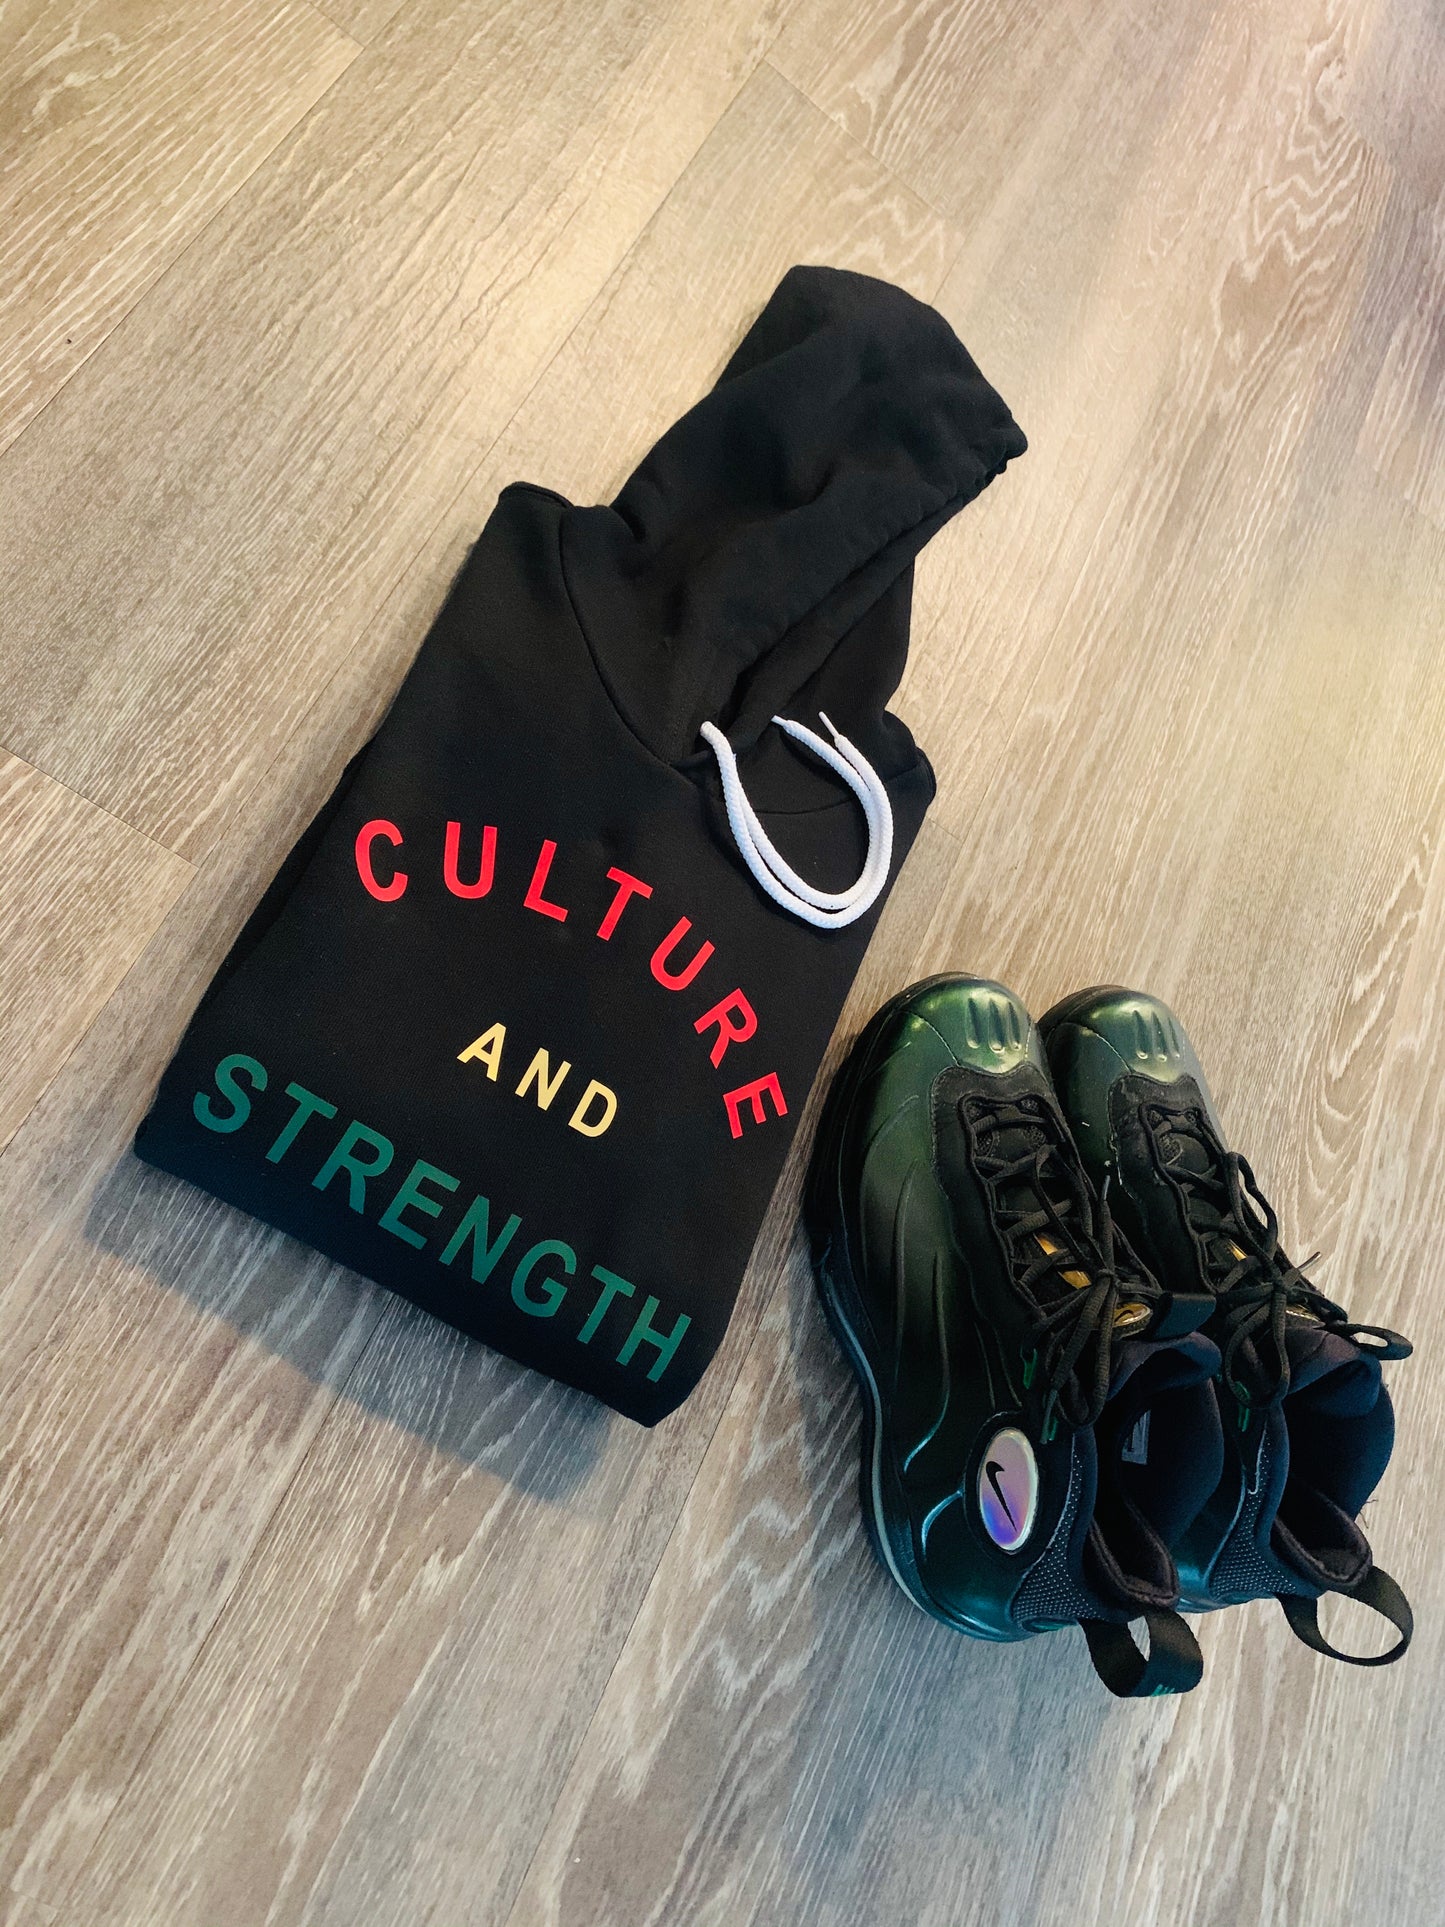 BLACK HISTORY MATTERS- CULTURE AND STRENGTH HOODIE